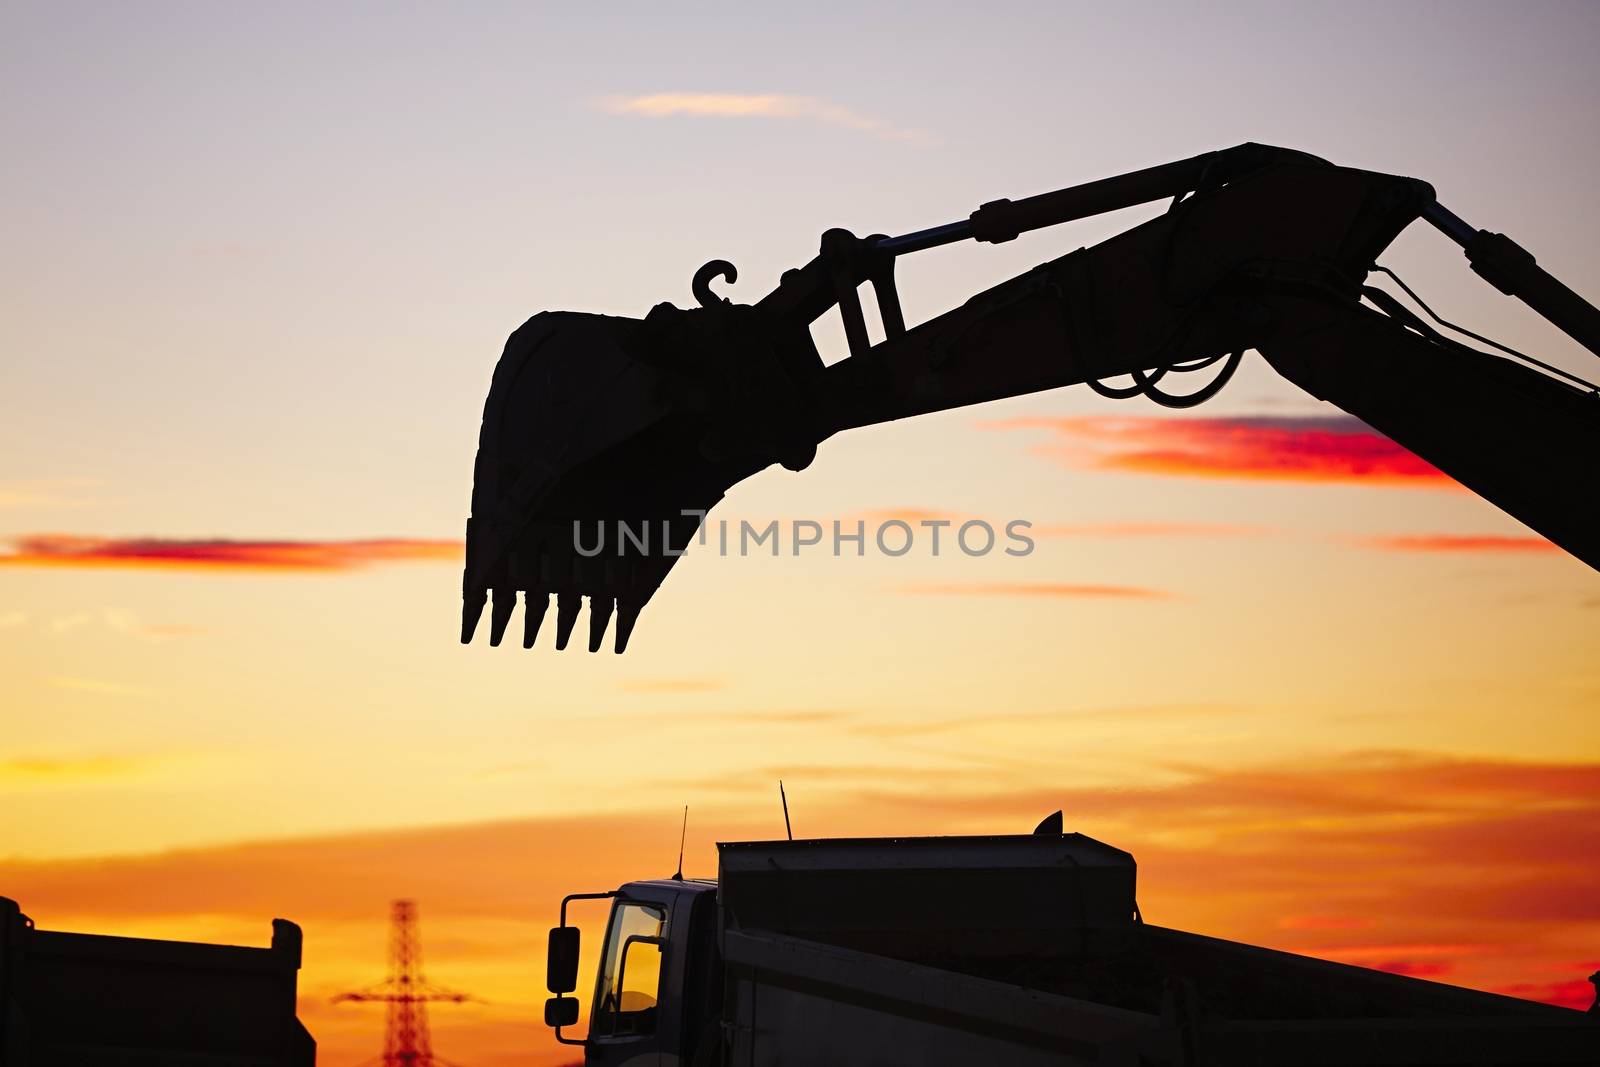 Silhouette of the backhoe in the building site